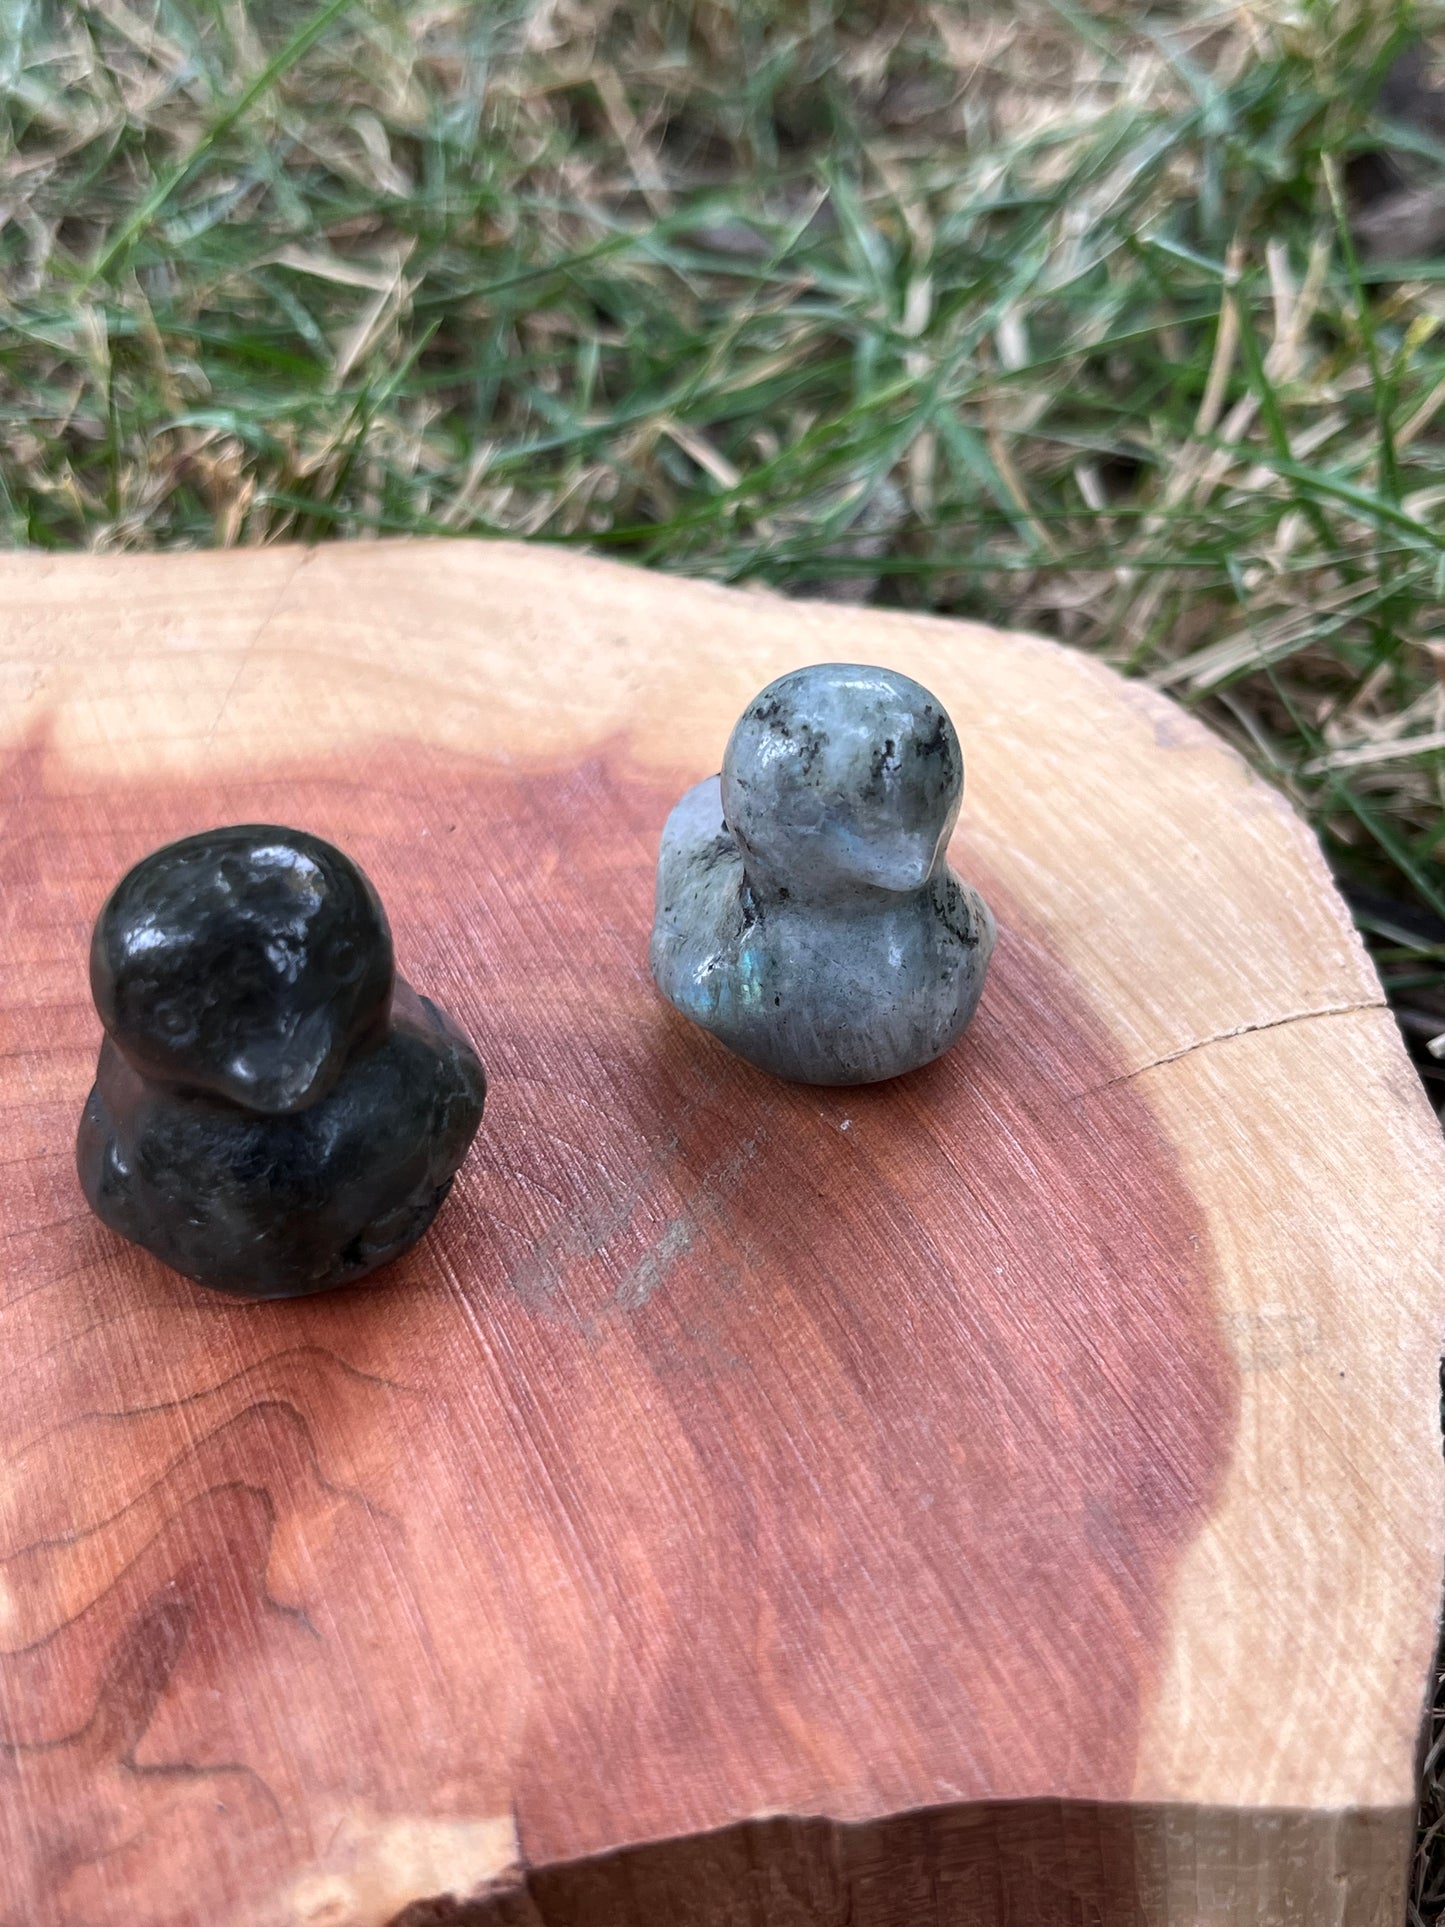 Duck Crystal Carving - Mini